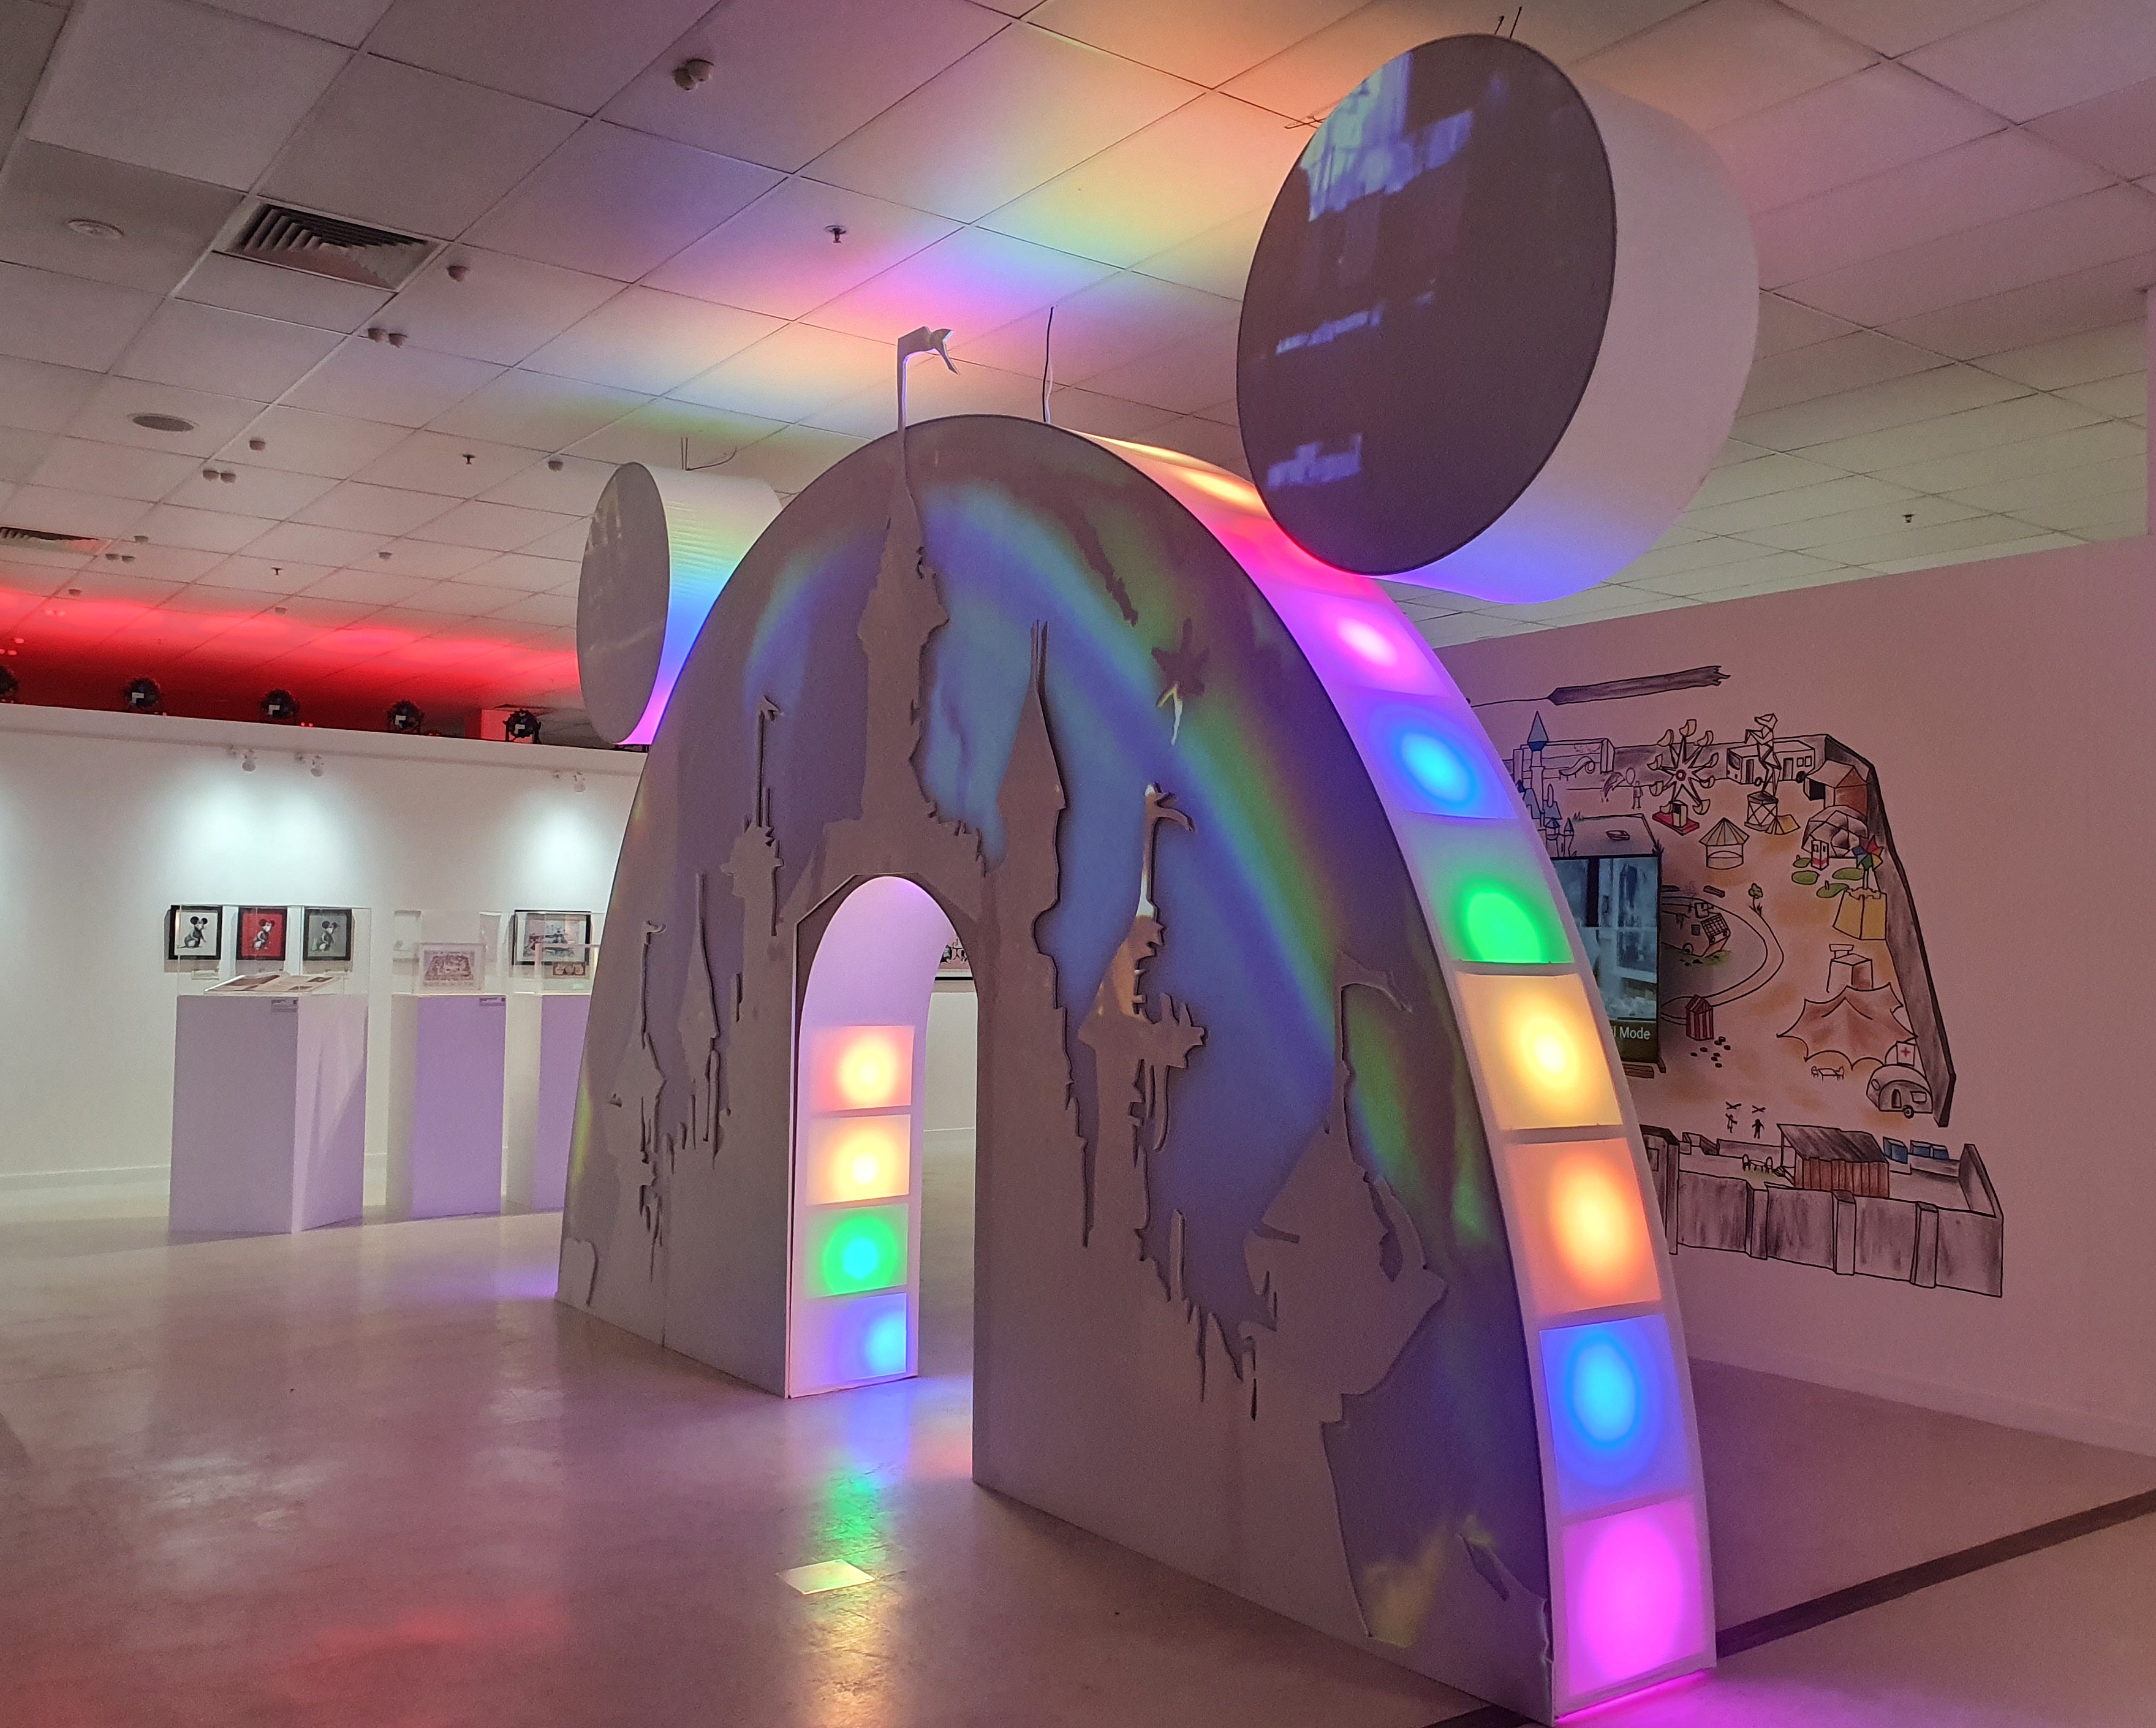 A doorway shaped like Mickey Mouse ears with bright colours projected onto it, seen at an exhibition.